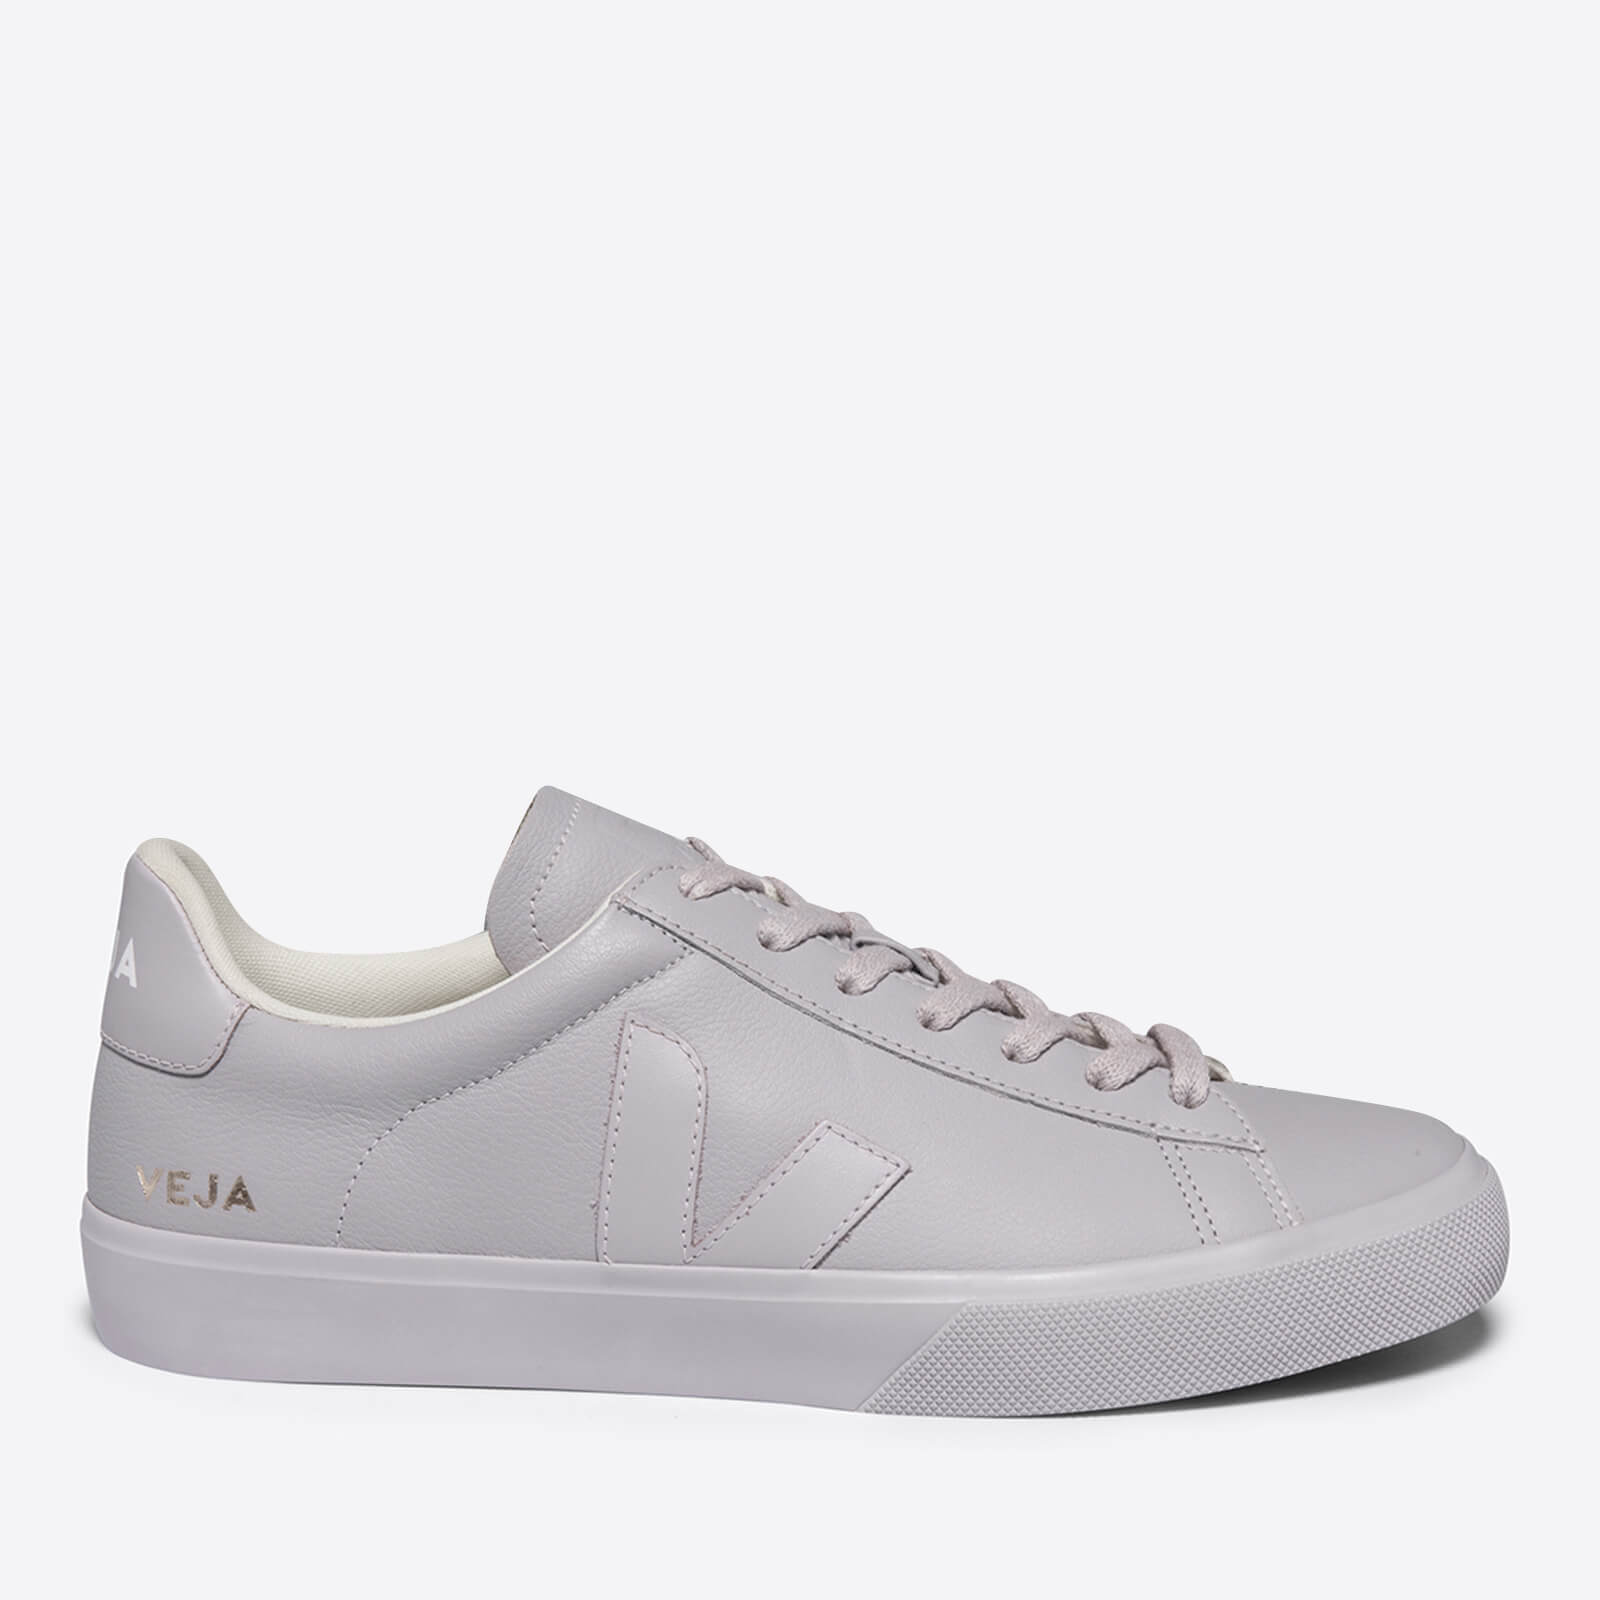 Veja Women’s Campo Chrome Free Leather Trainers